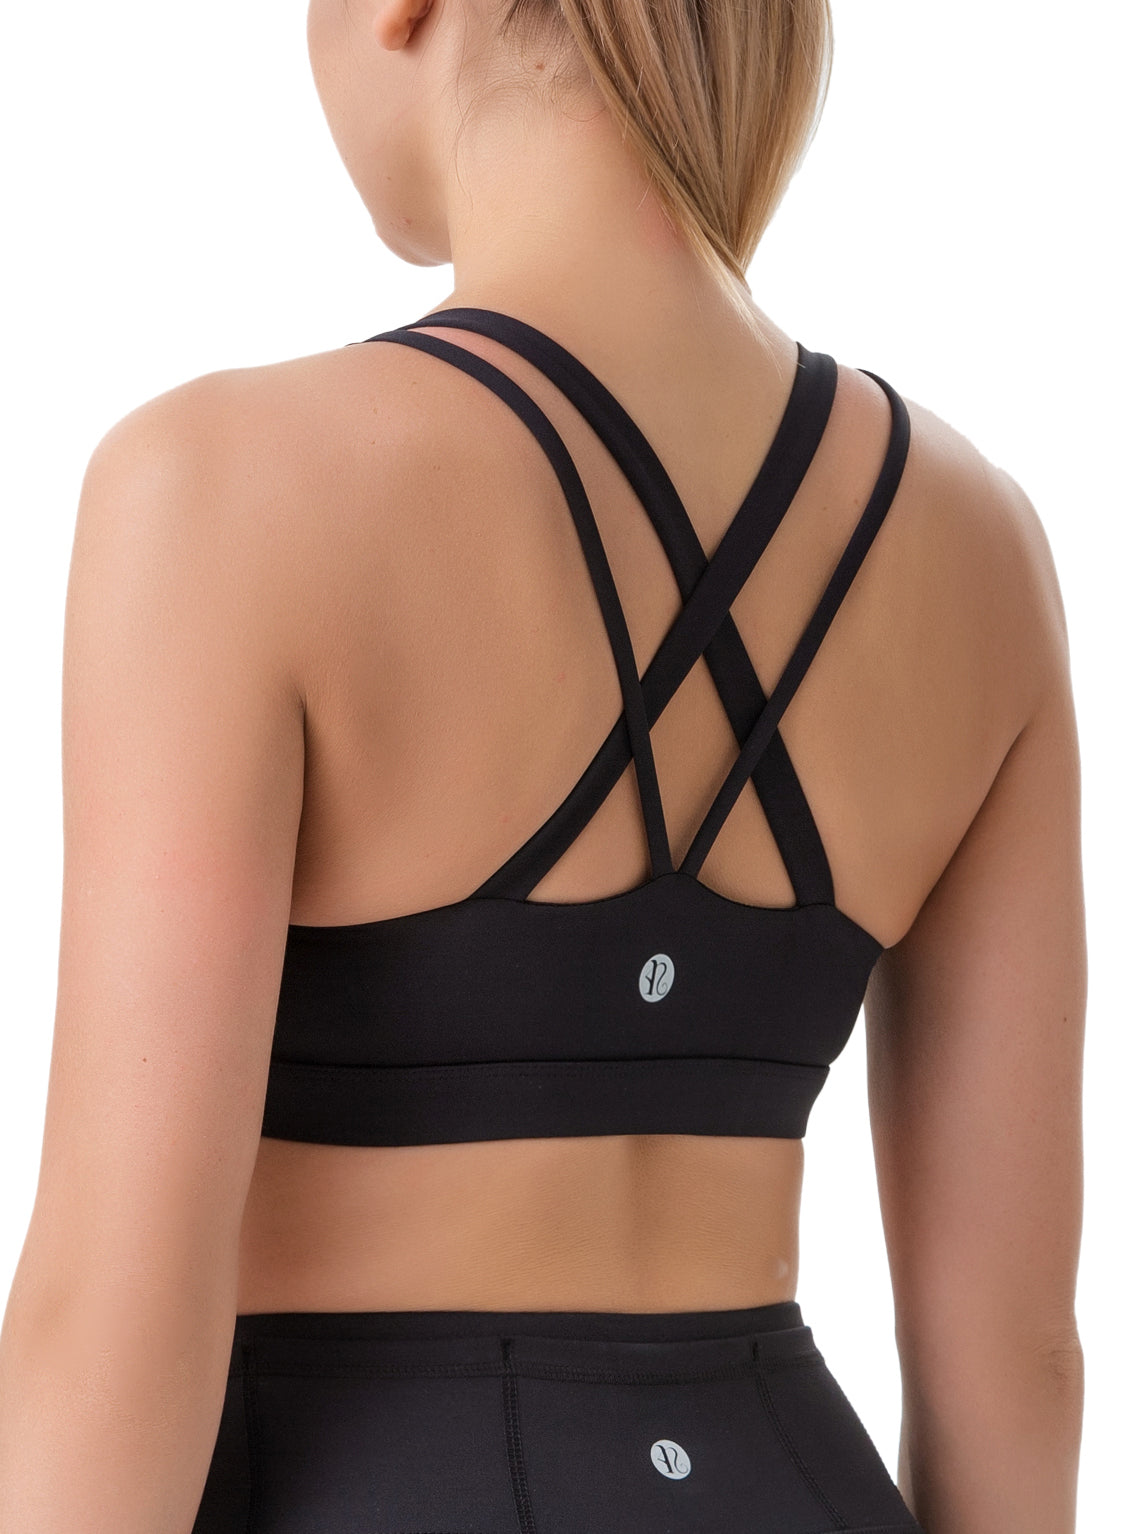 Buy RUNNING GIRL Sports Bra for Women, Criss-Cross Back Padded Strappy  Sports Bras Medium Support Yoga Bra with Removable  Cups(WX2353.White.CN:L,US:M) at